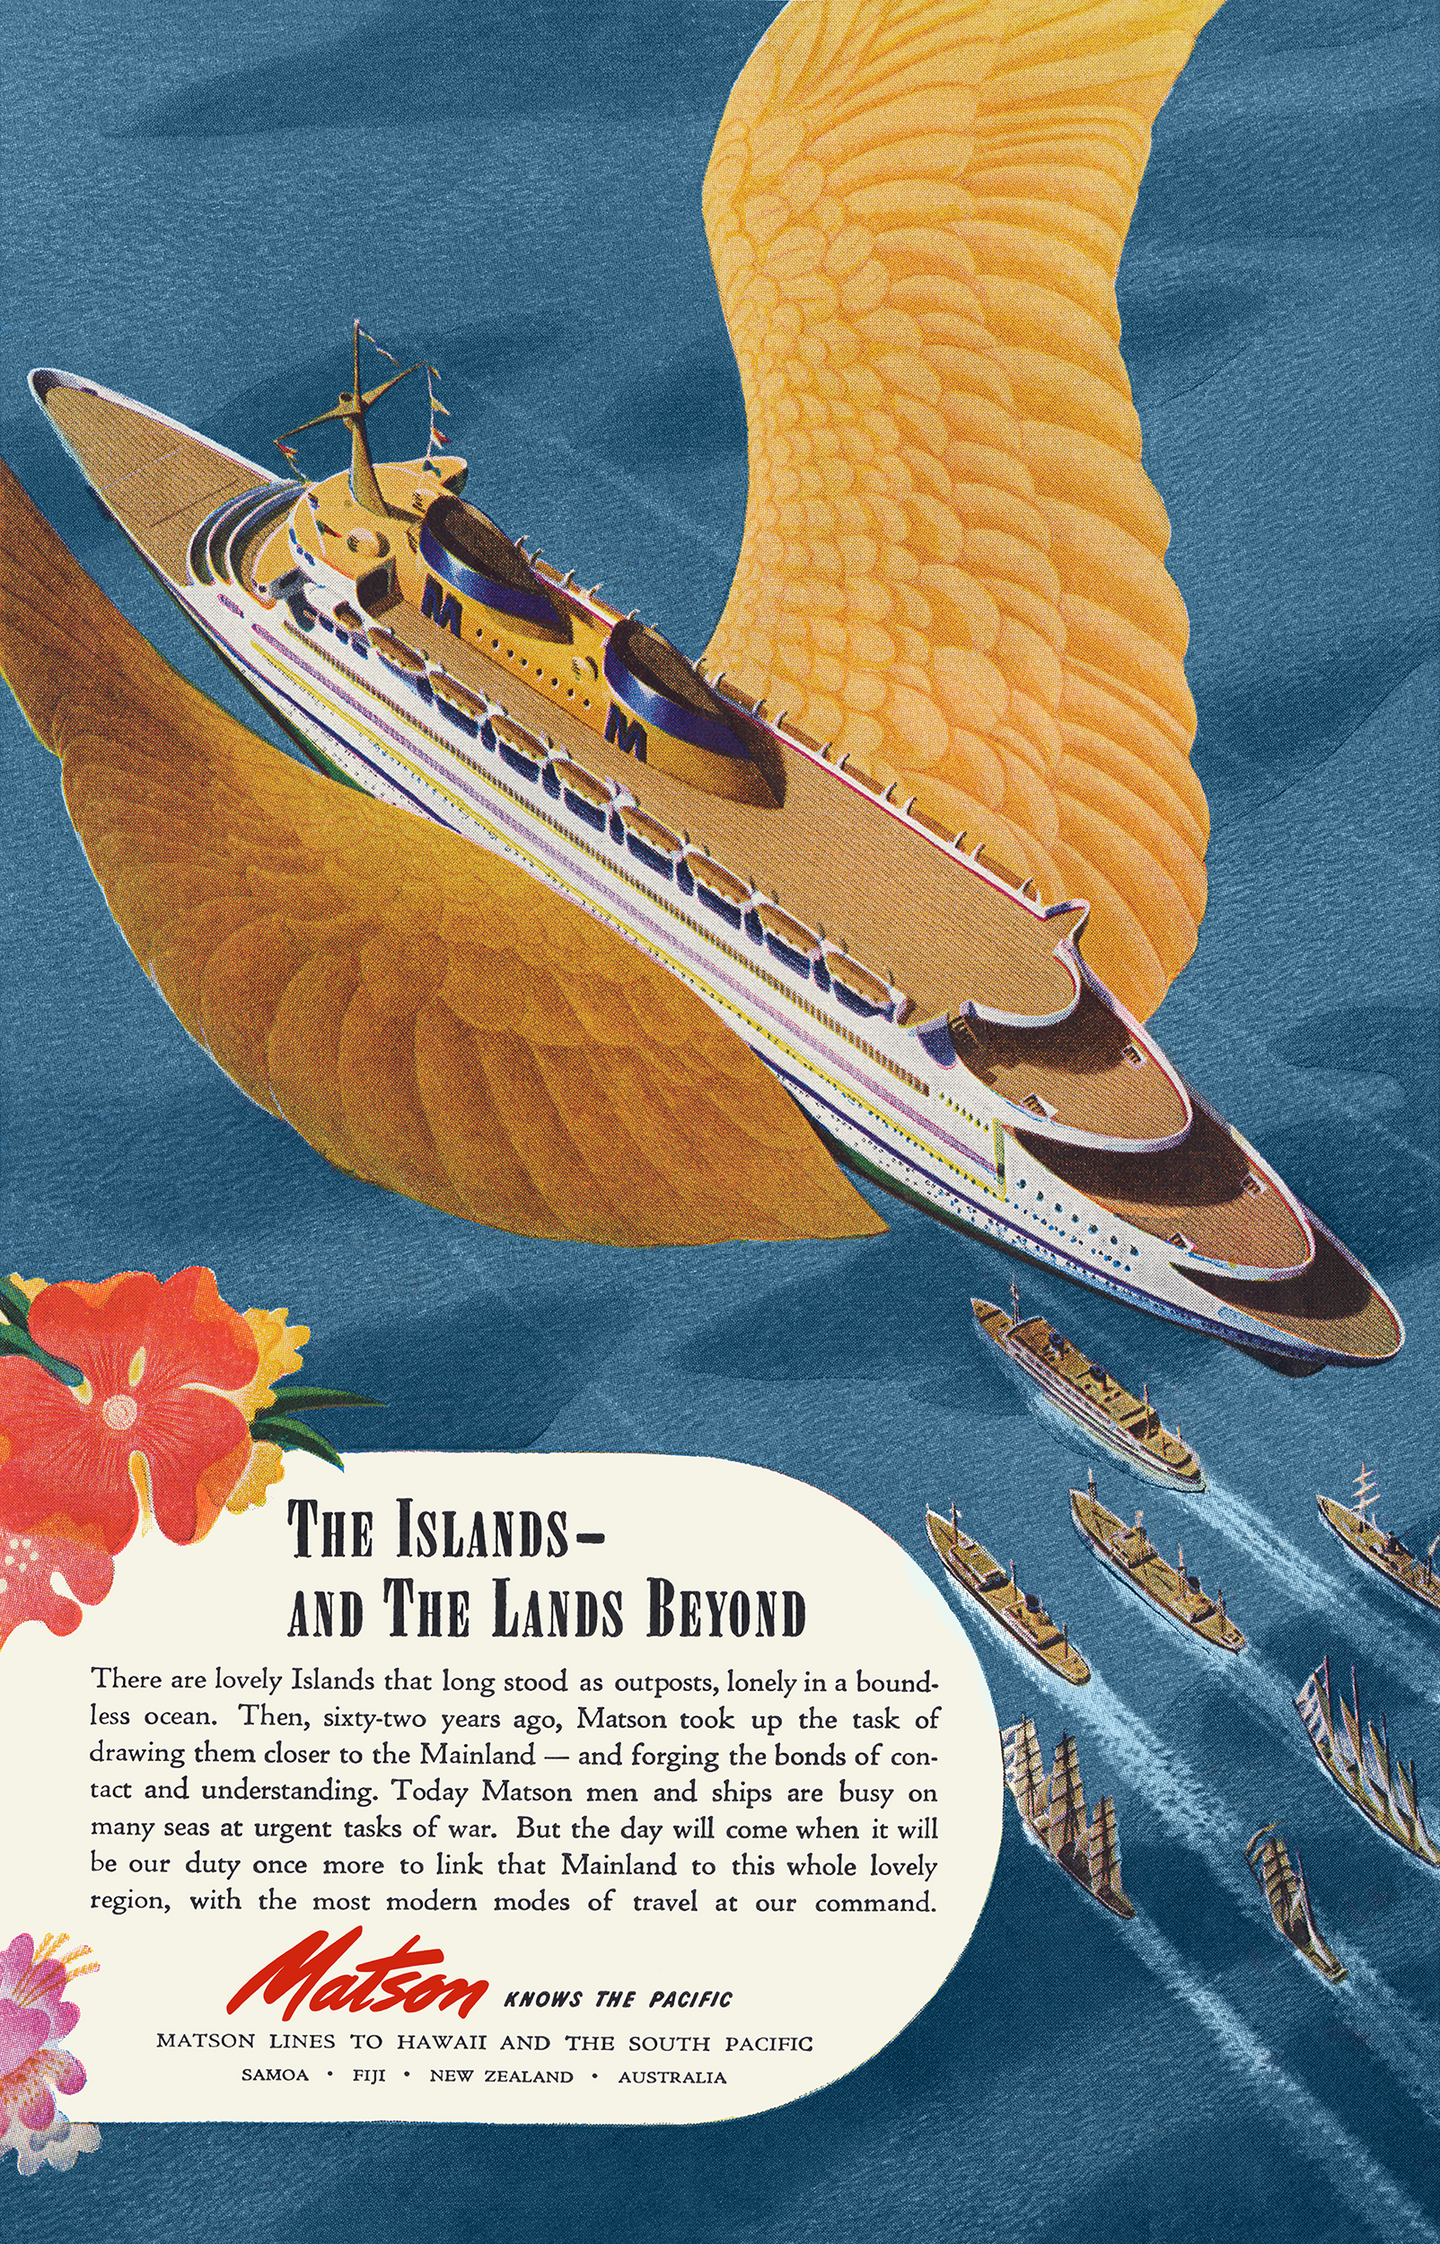 Matson Lines Hawaii travel advertisement featuring aerial view of cruise ship on a blue ocean with large golden wings protruding from either side of the ship. Behind the ship trail several smaller boats.